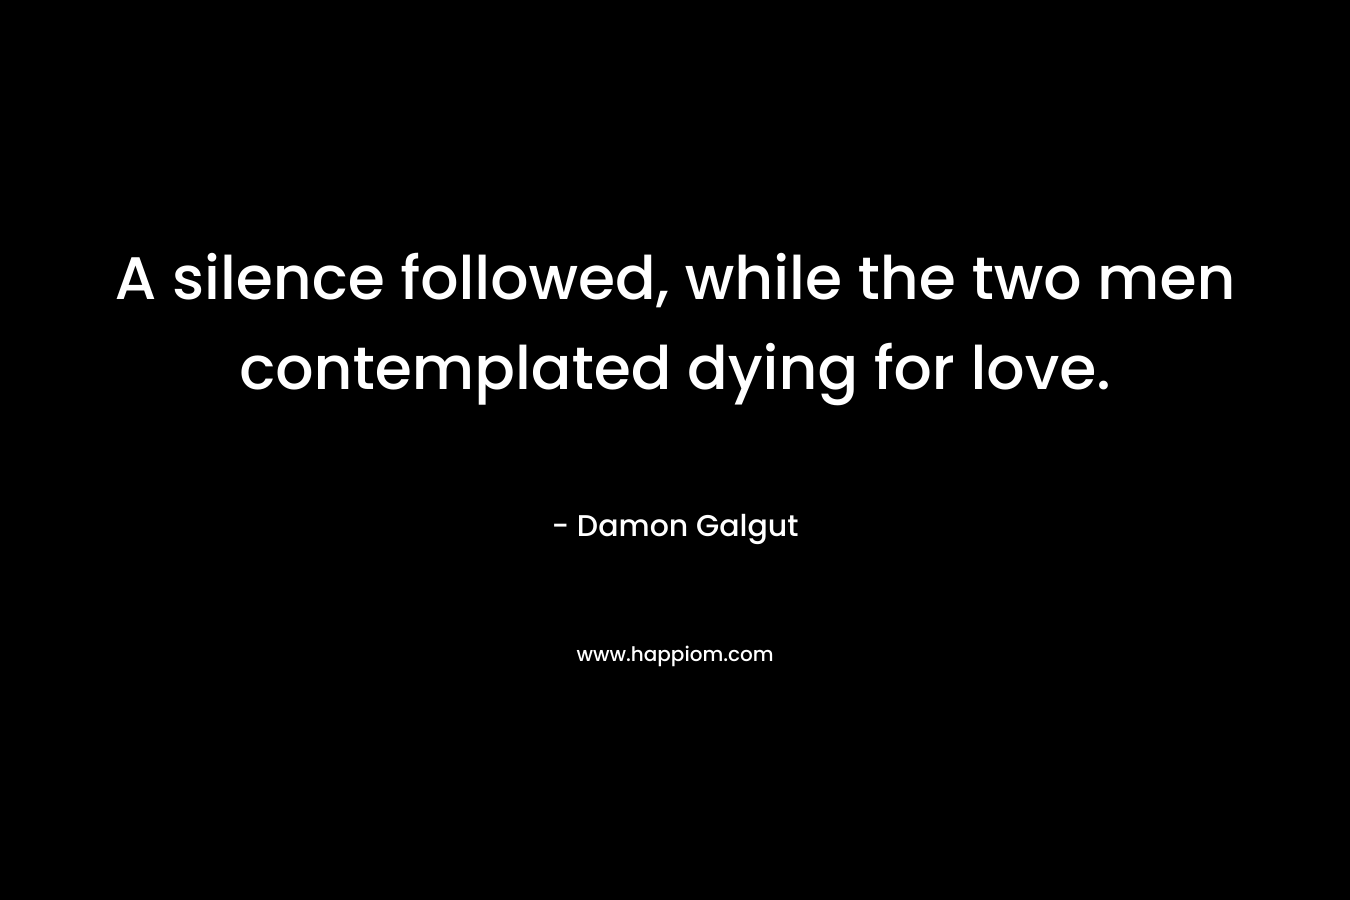 A silence followed, while the two men contemplated dying for love. – Damon Galgut